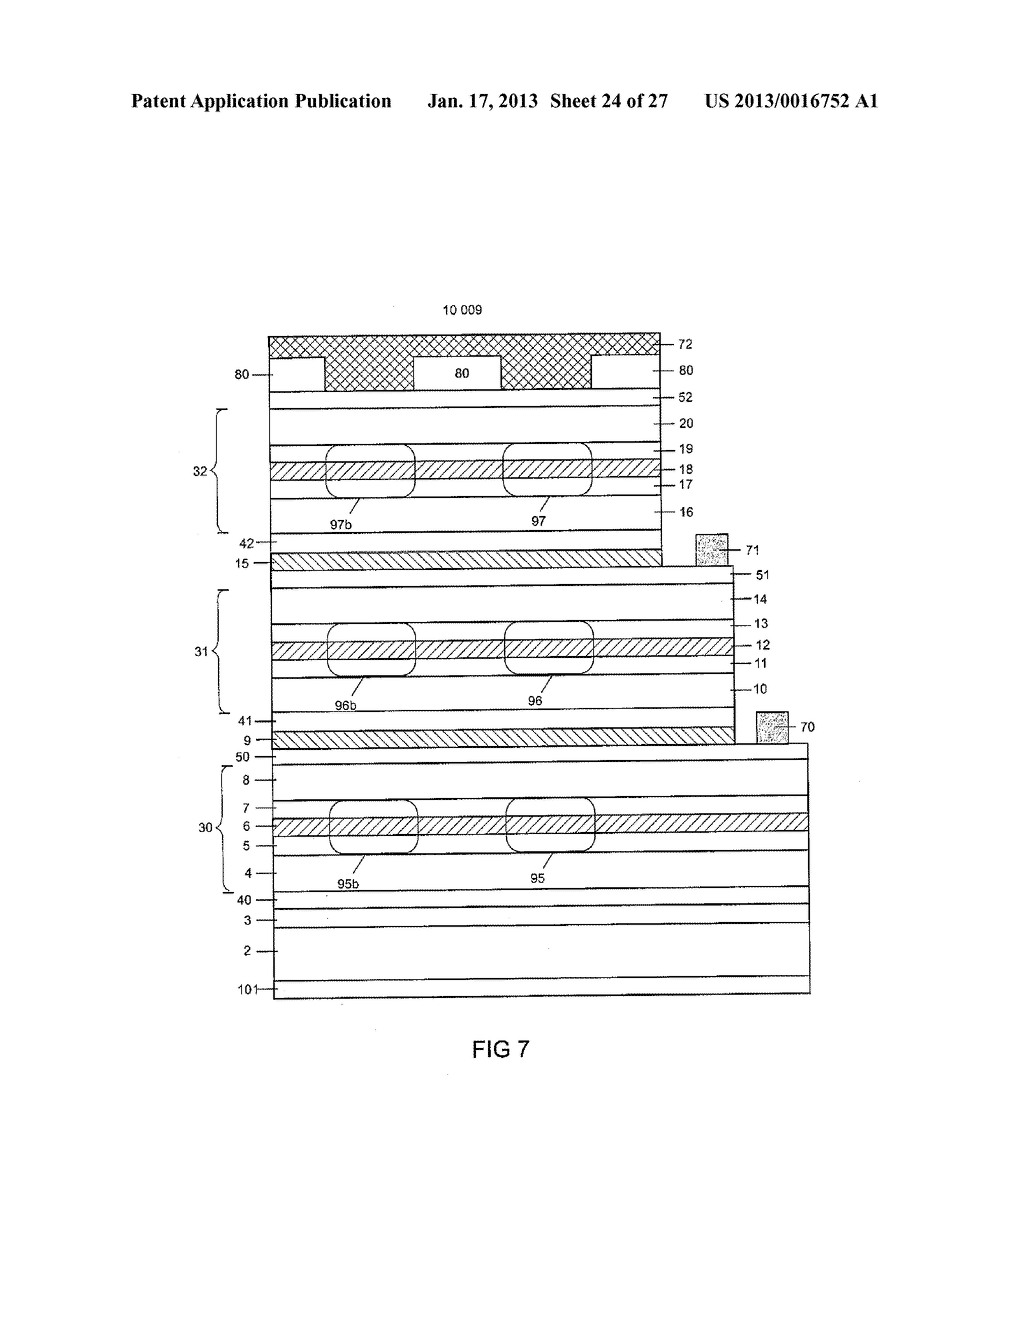 Laser Diode Assembly and Method for Producing a Laser Diode AssemblyAANM Lell; AlfredAACI Maxhutte-HaidhofAACO DEAAGP Lell; Alfred Maxhutte-Haidhof DEAANM Straussburg; MartinAACI DonaustaufAACO DEAAGP Straussburg; Martin Donaustauf DE - diagram, schematic, and image 25